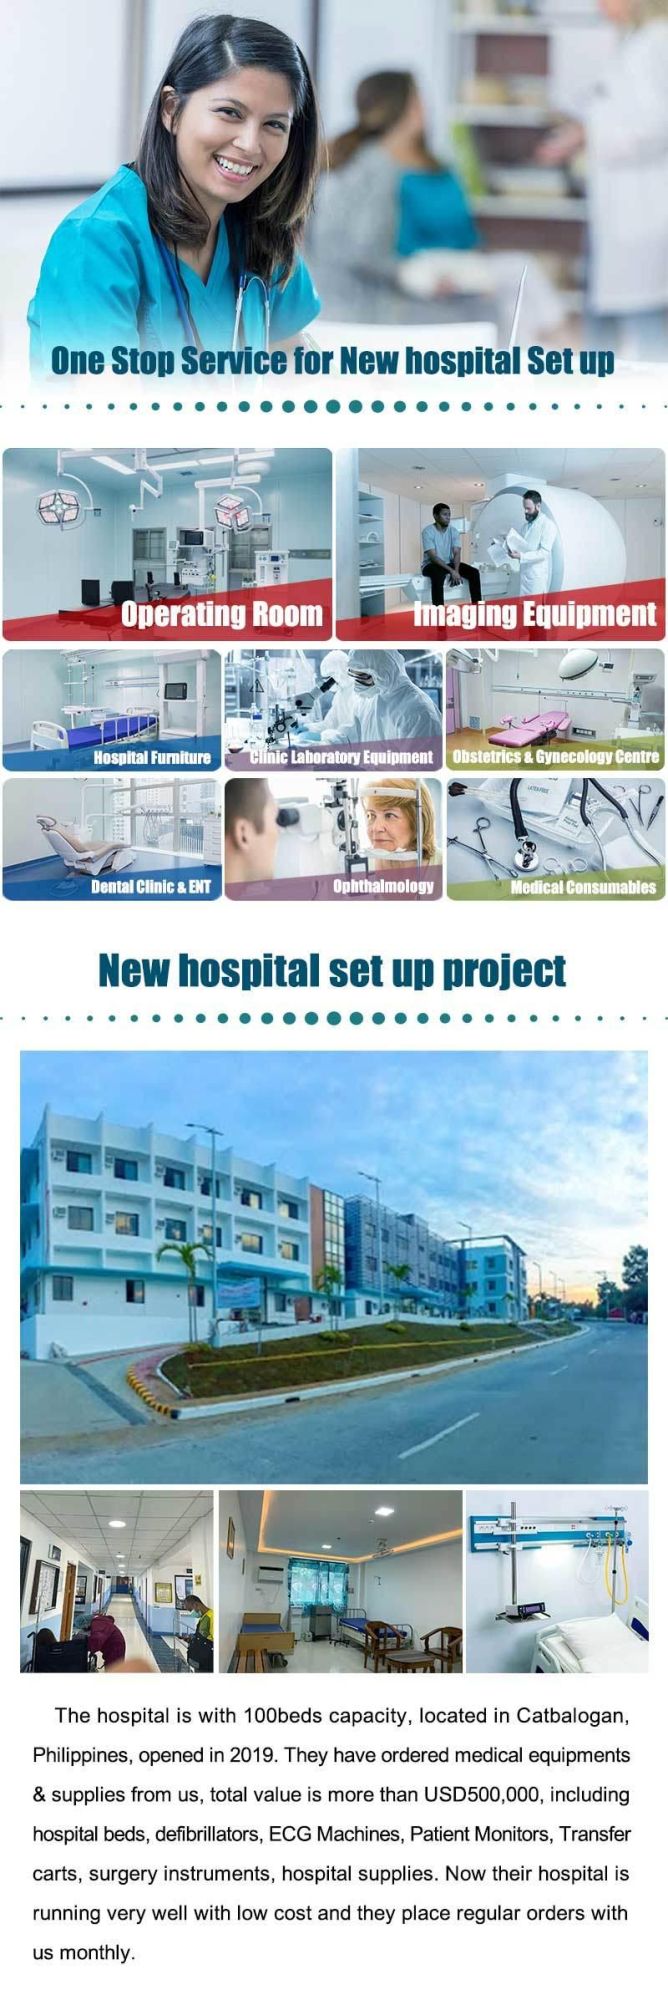 High Quality Five Function Electric Care Bed/ICU Bed/Hospital Bed